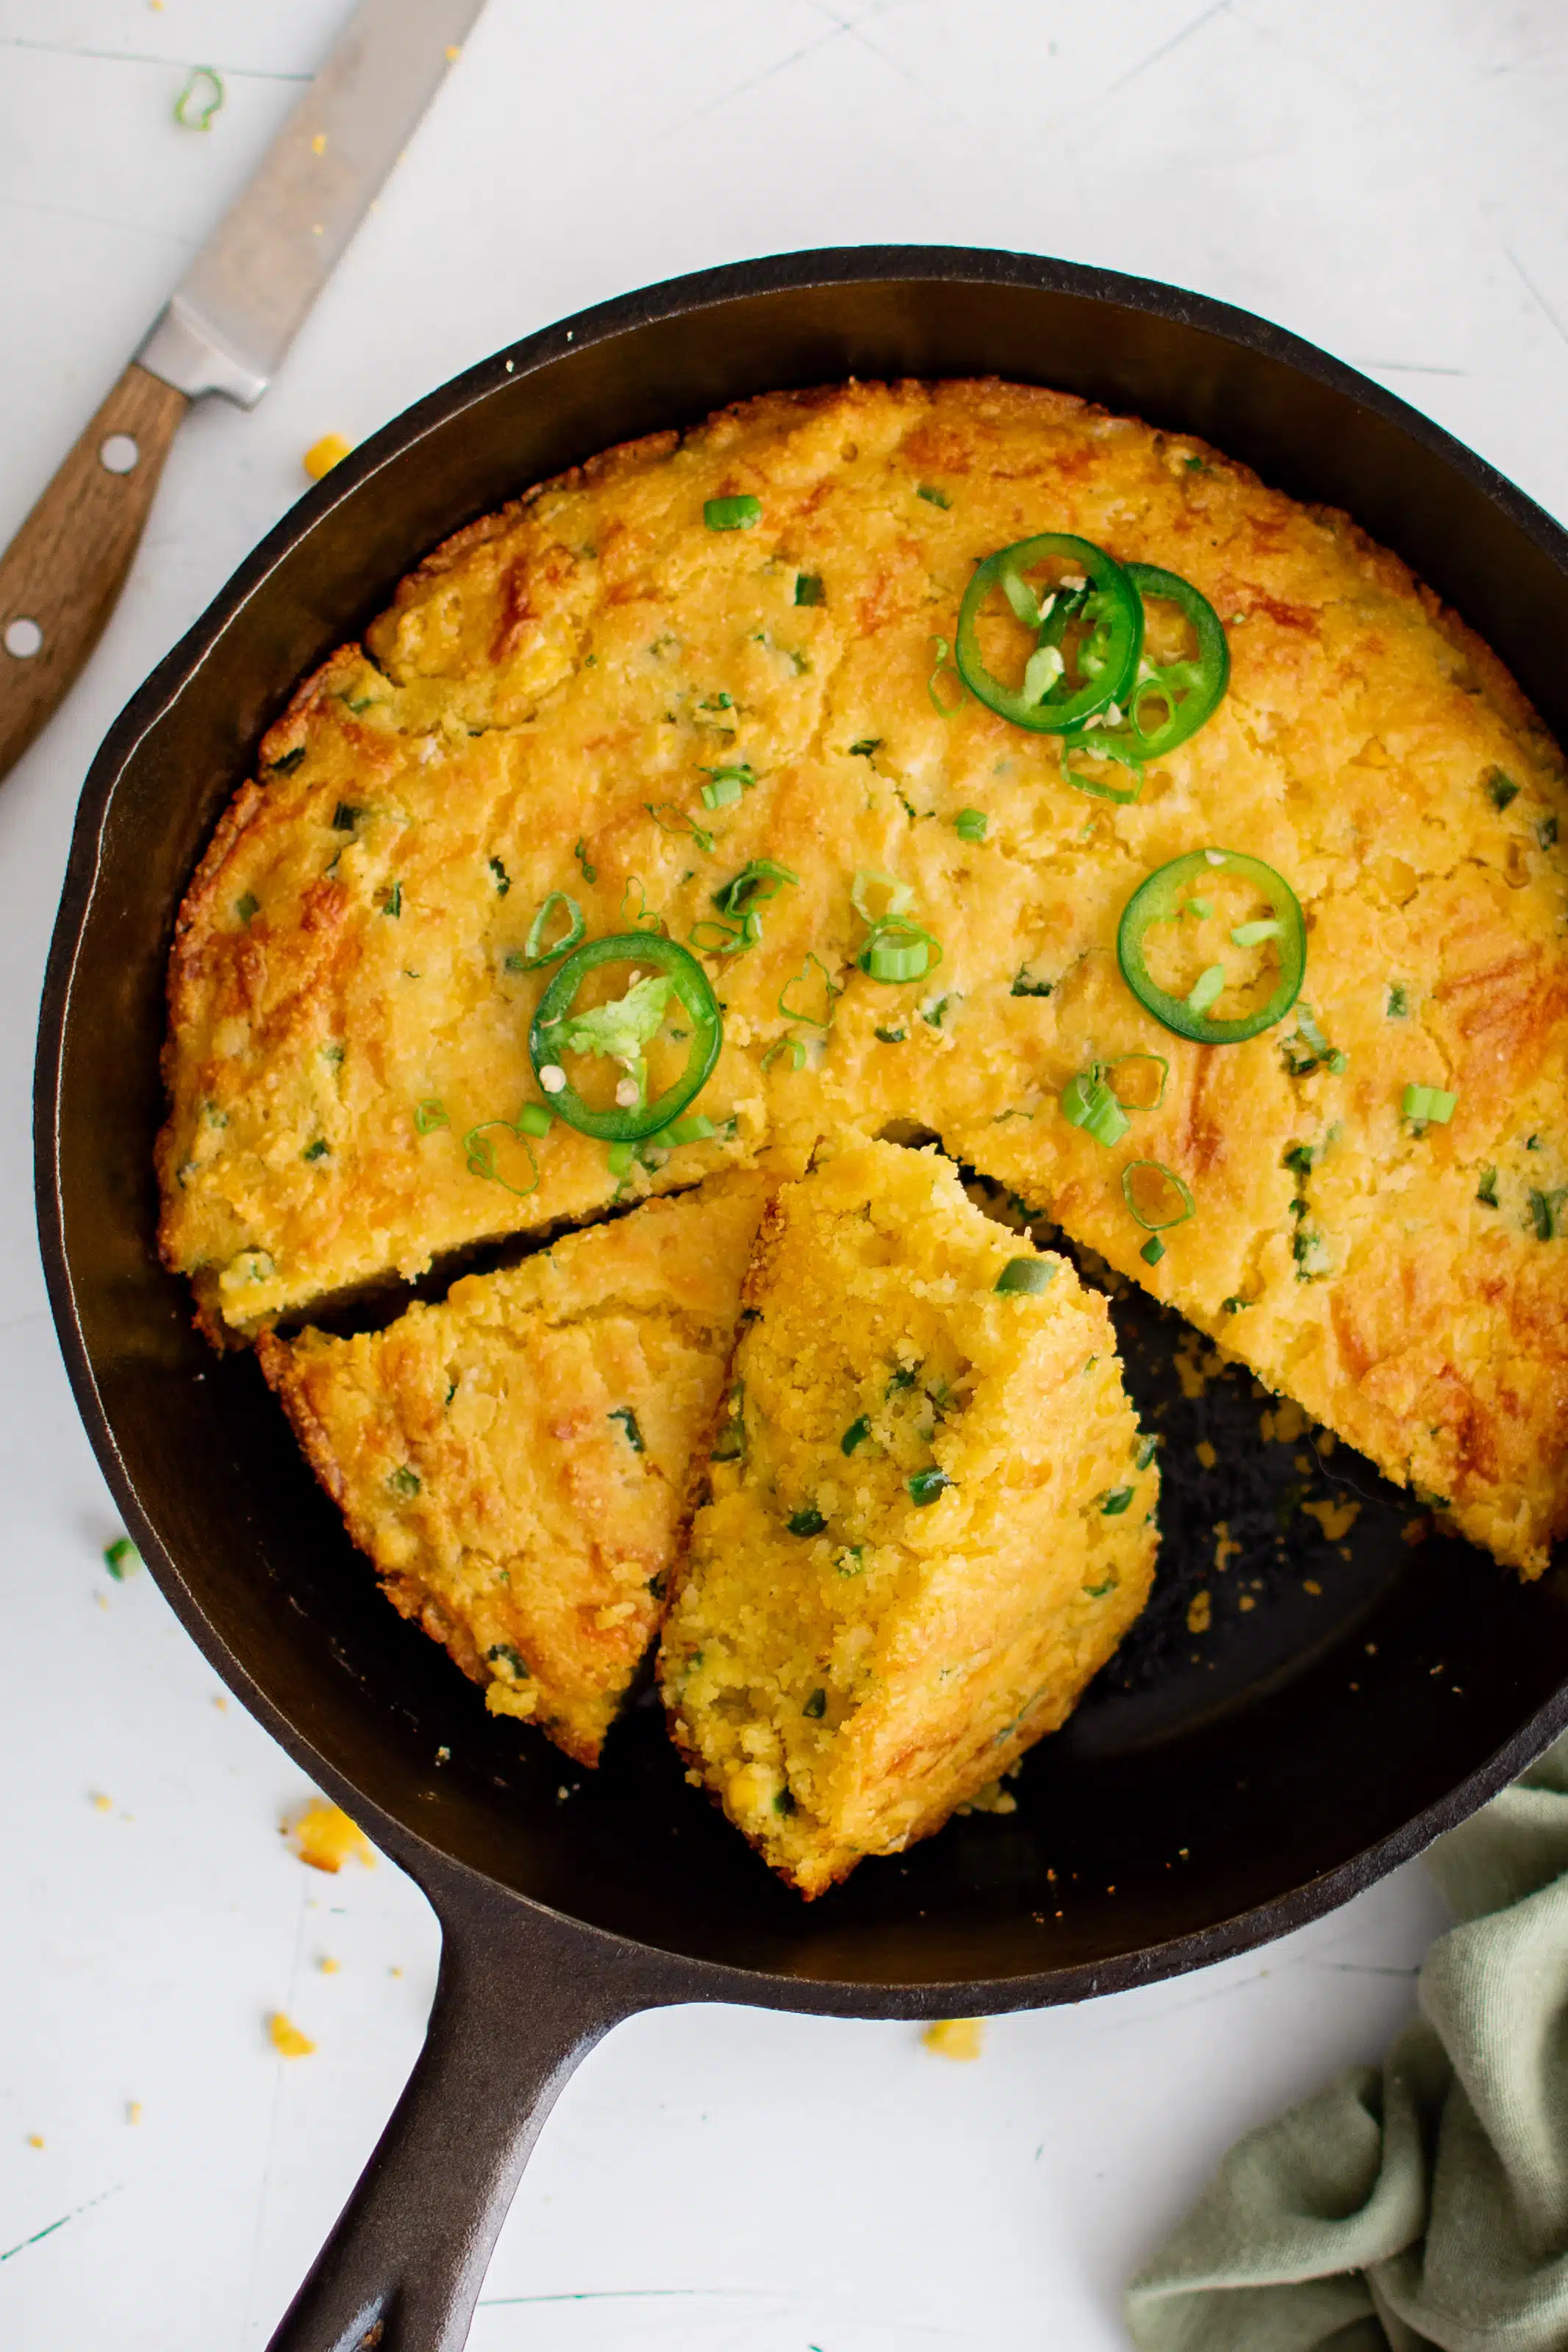 Overhead image of a cast iron skillet filled with baked sliced Mexican cornbread with diced jalapeños, Monterey Jack cheese and cheddar cheese.